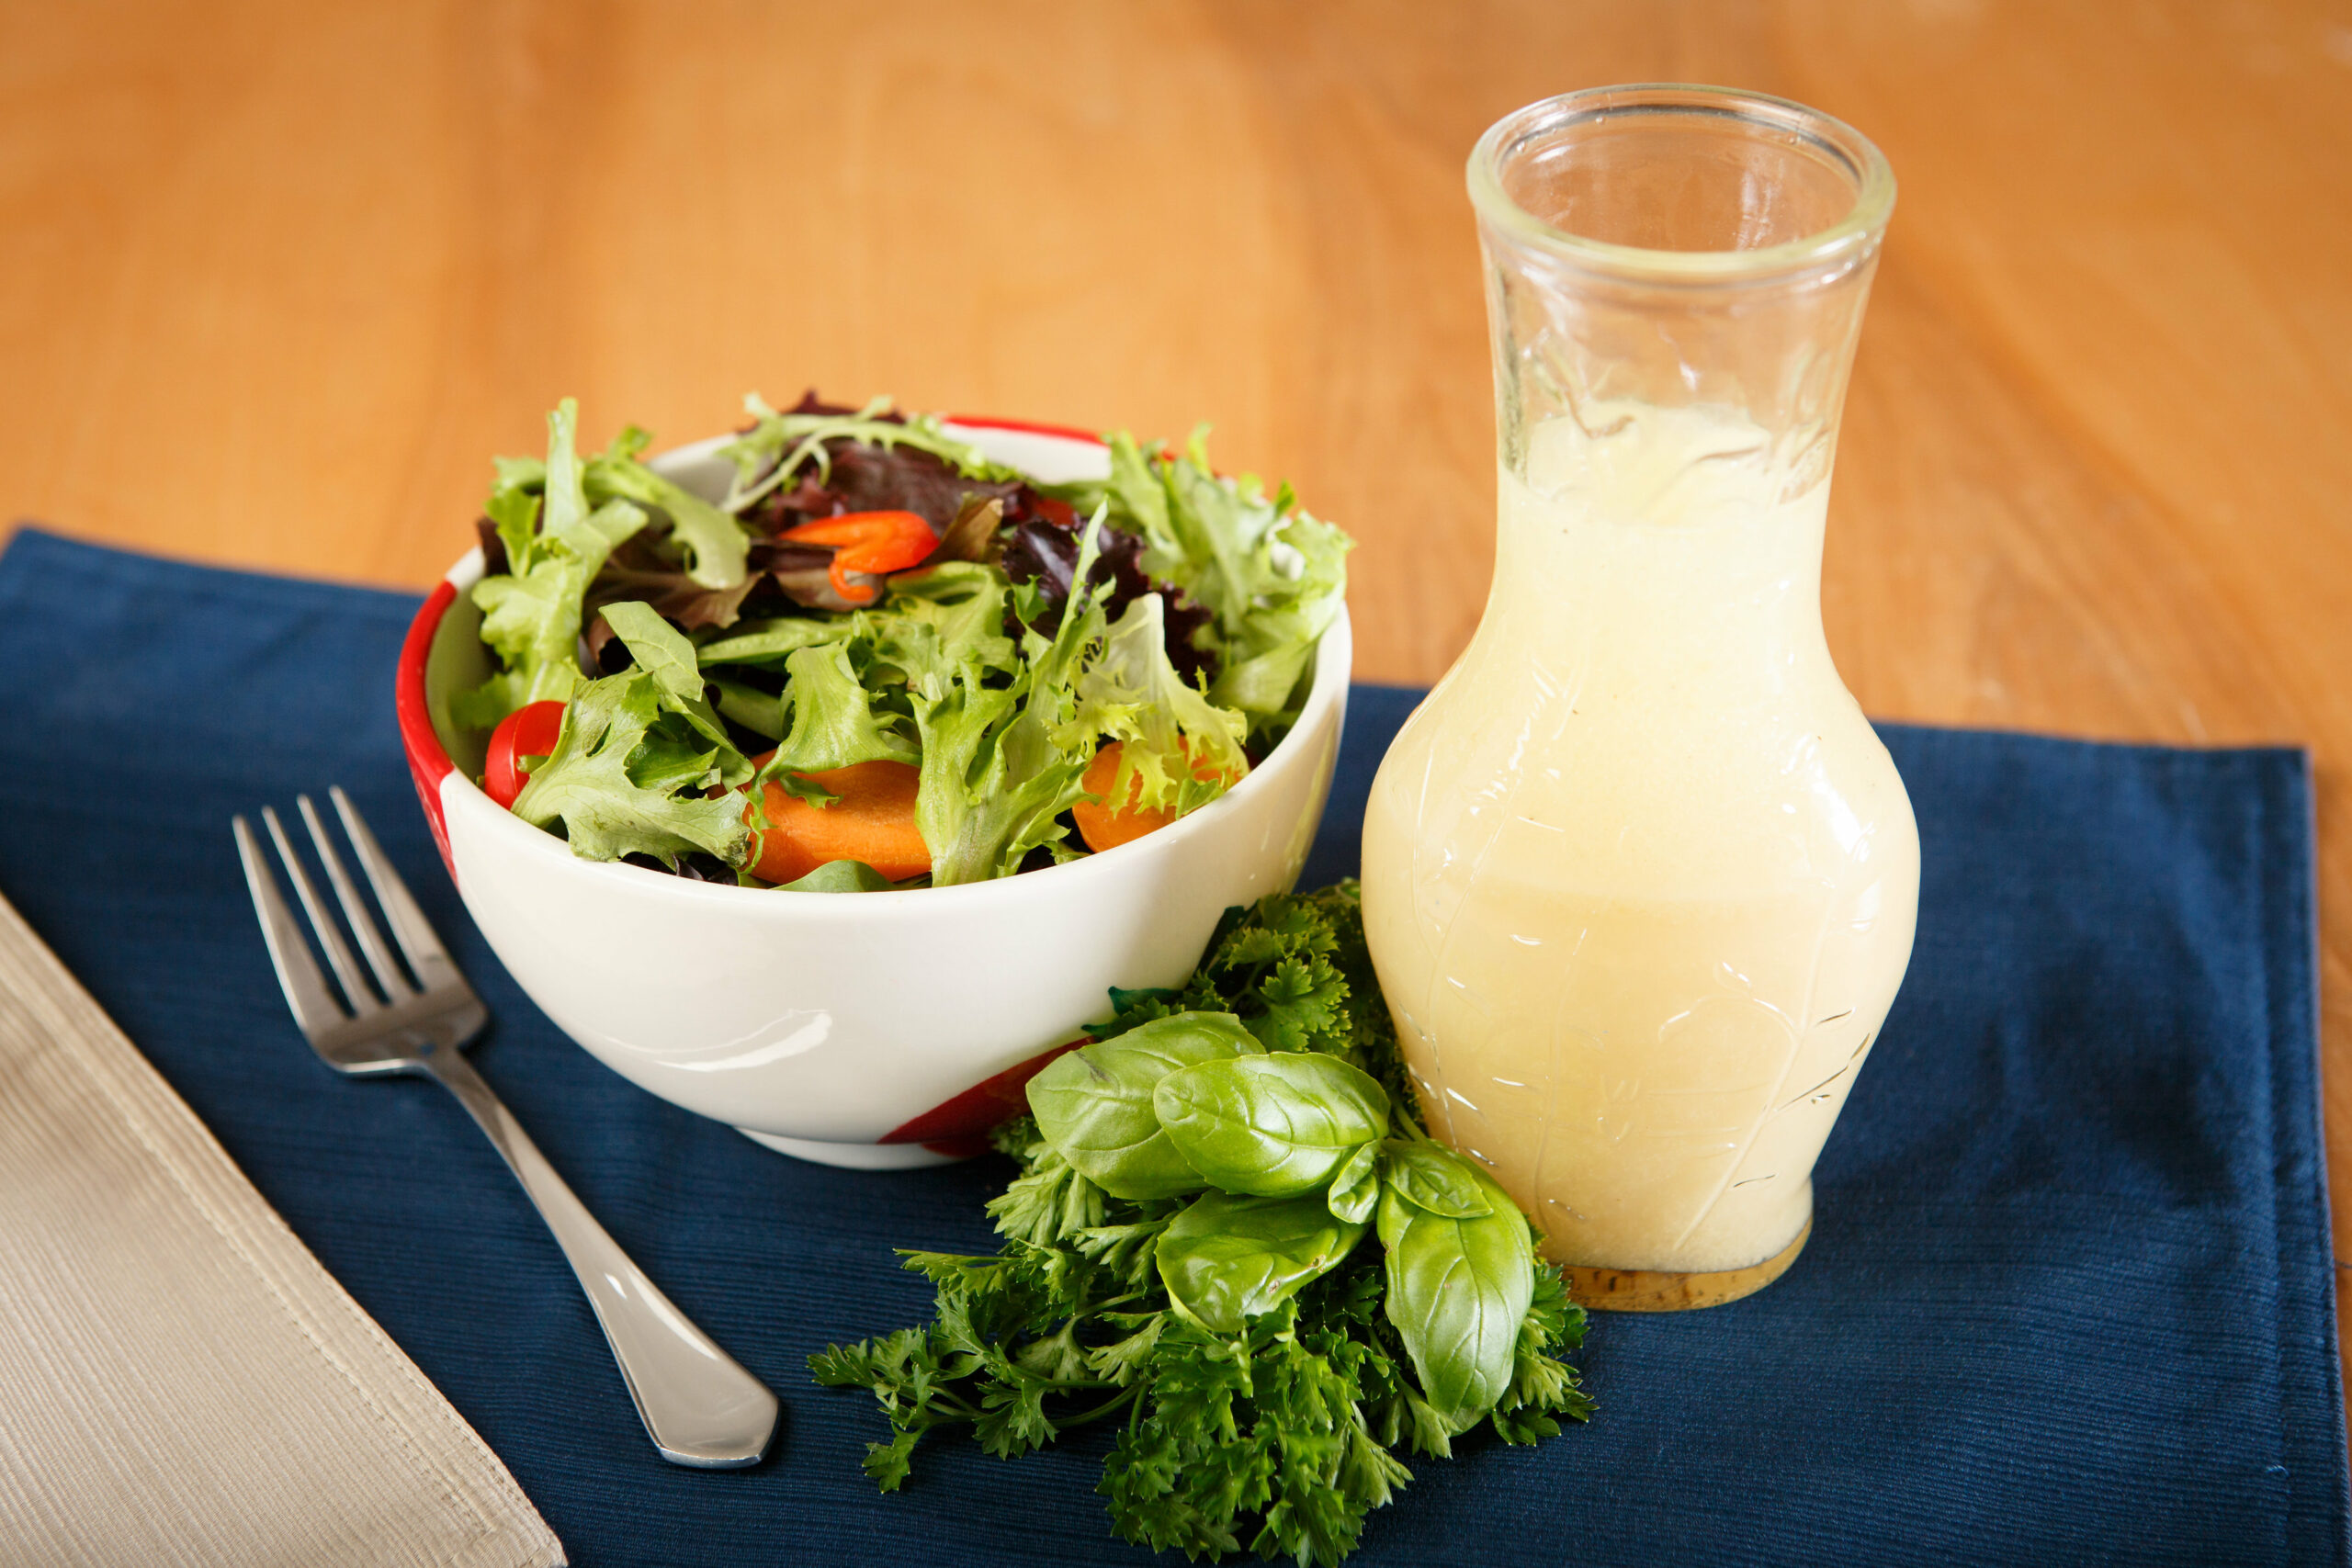 flask containing vinaigrette salad dressing next to salad in a bowl and fork